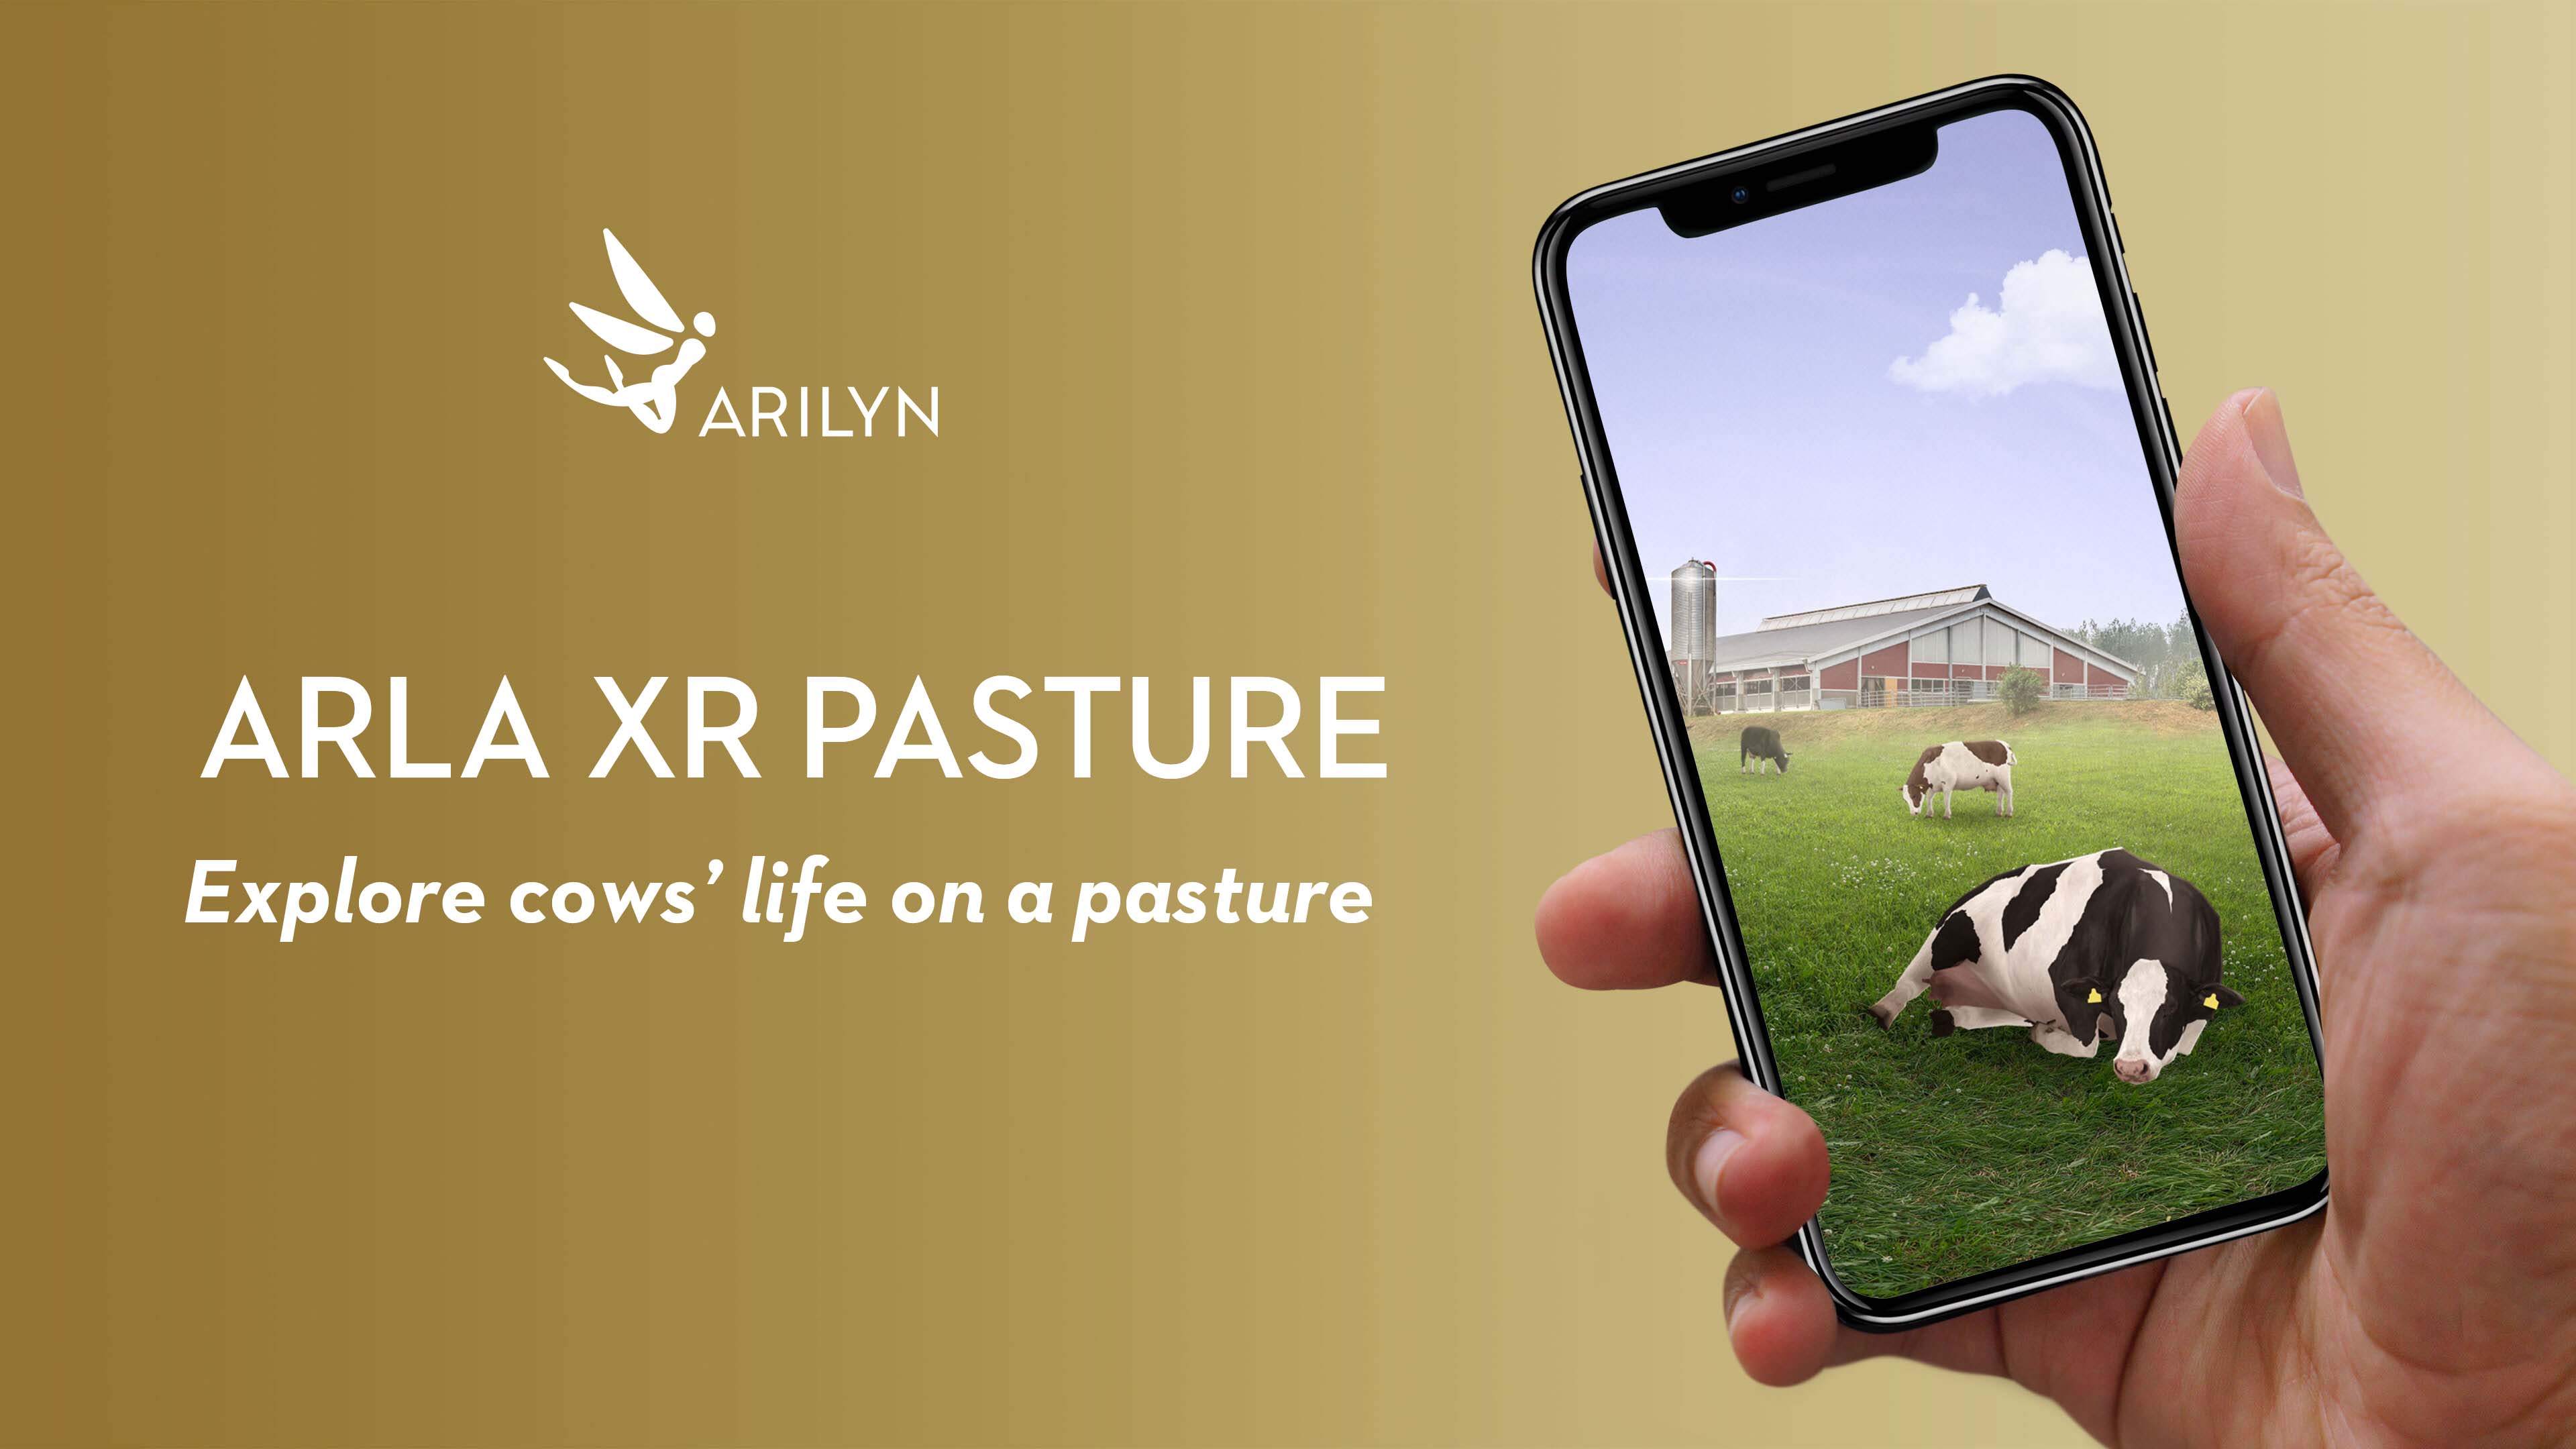 Arla's new XR world invites to explore cows' life on a pasture